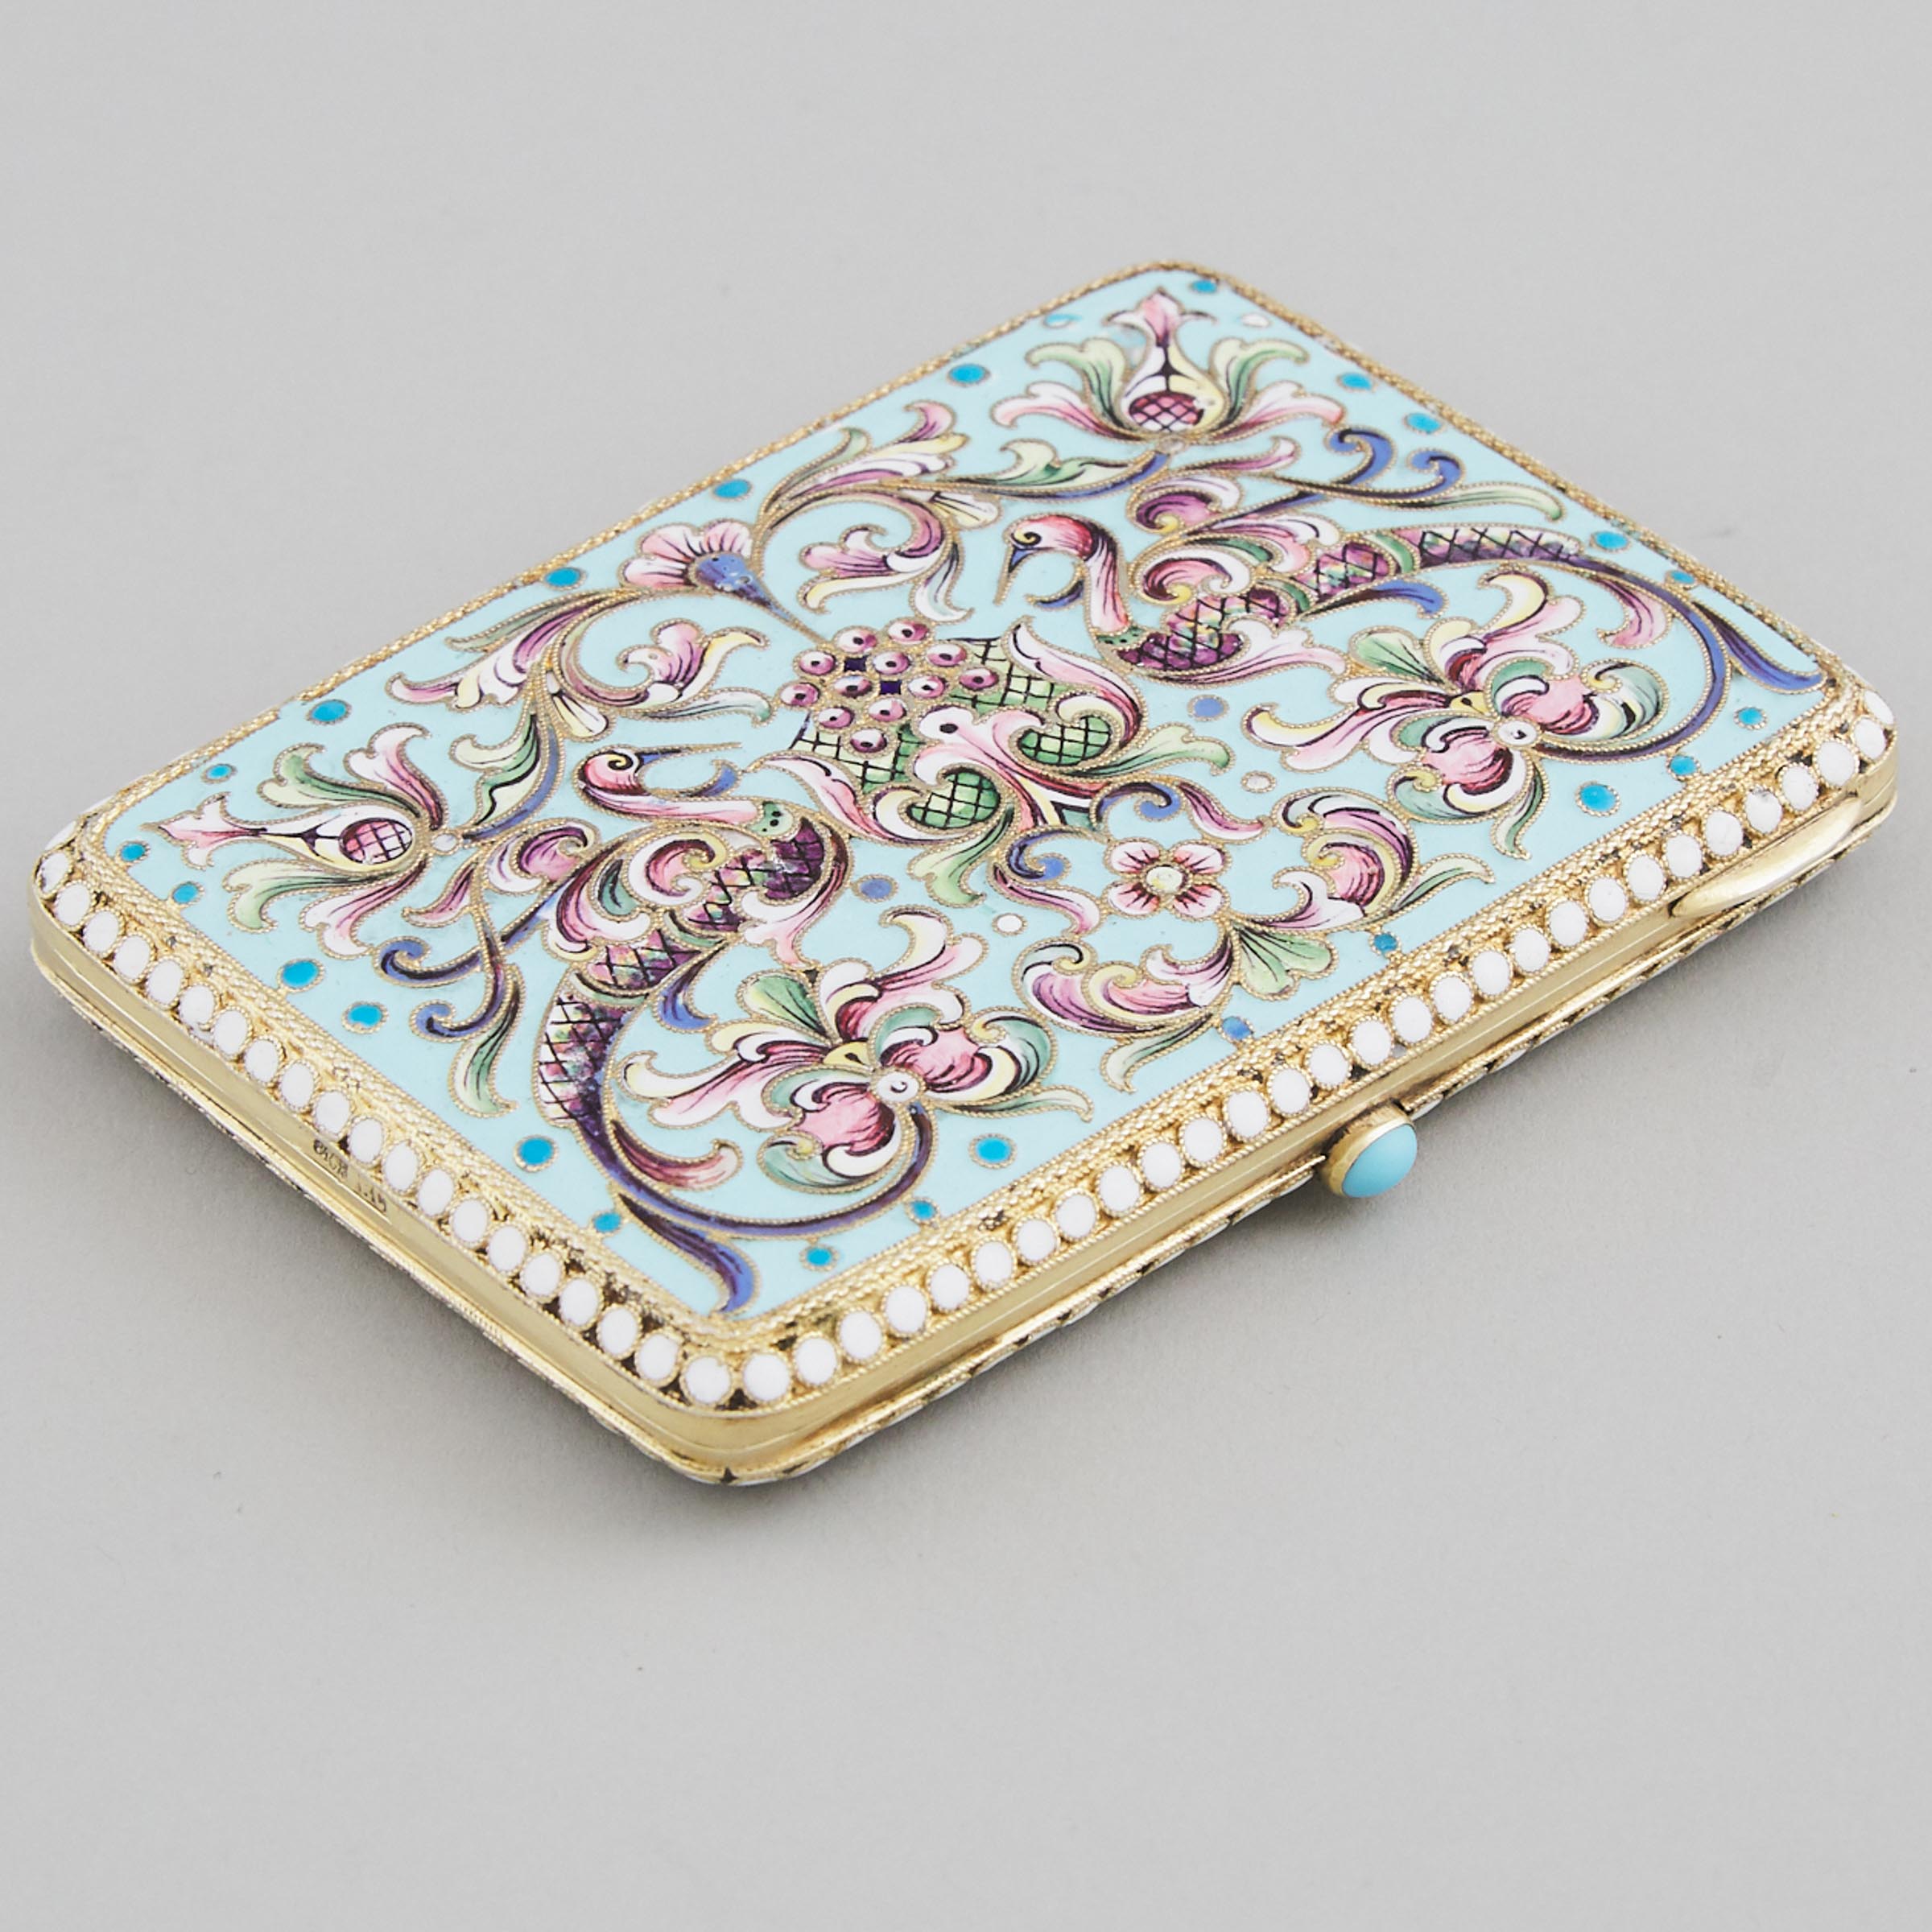 Russian Silver-Gilt and Cloisonné Shaded Enamel Rectangular Cigarette Case, Moscow, c.1899-1908